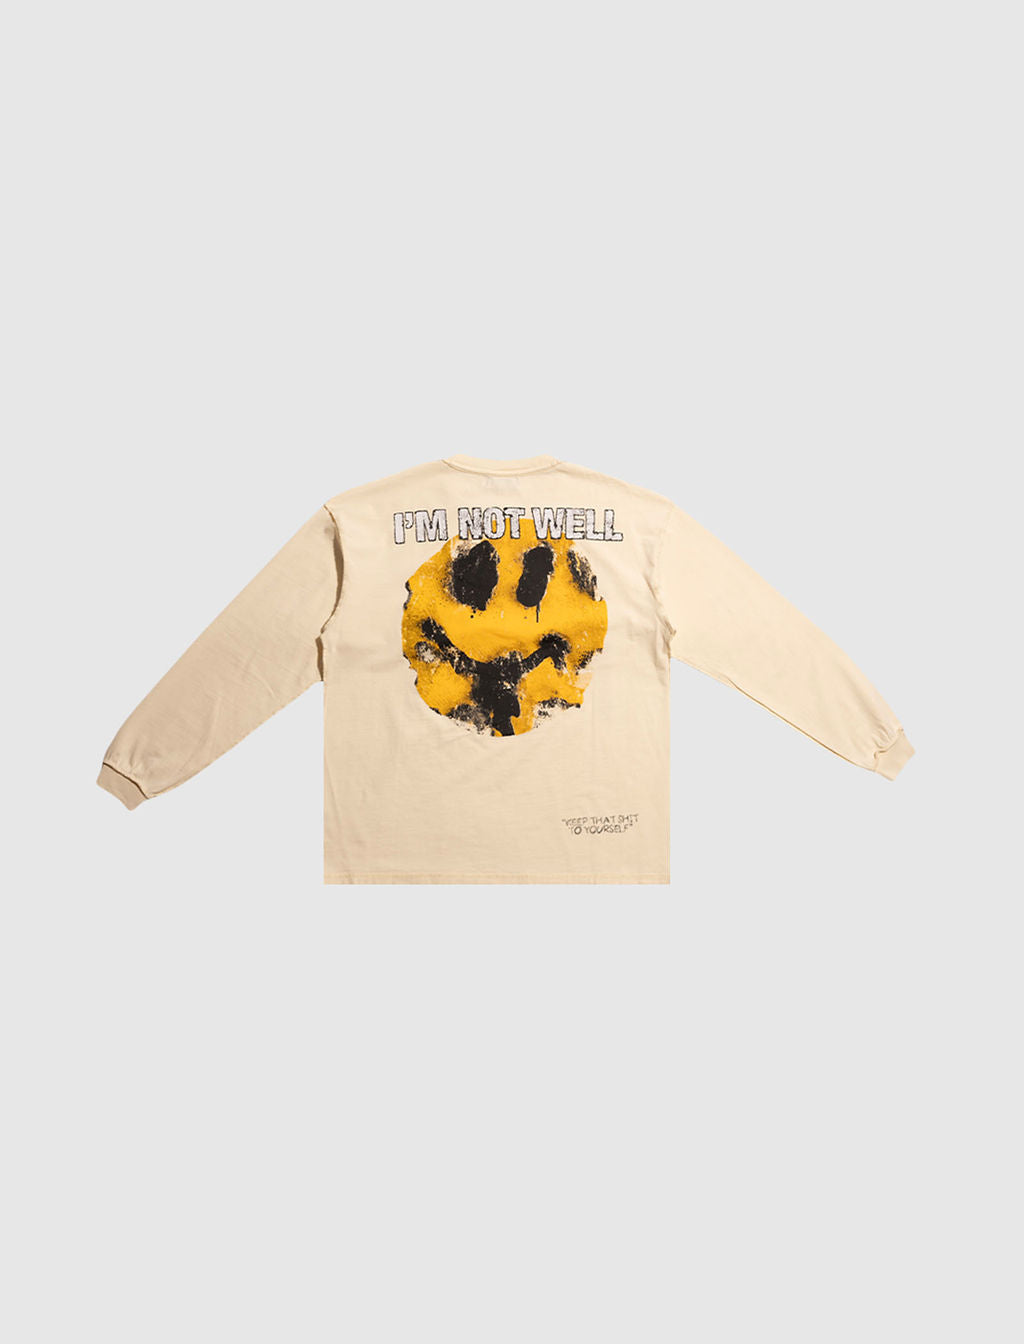 SMILEY FACE LONG SLEEVE T-SHIRT 2.0 IN CREAM